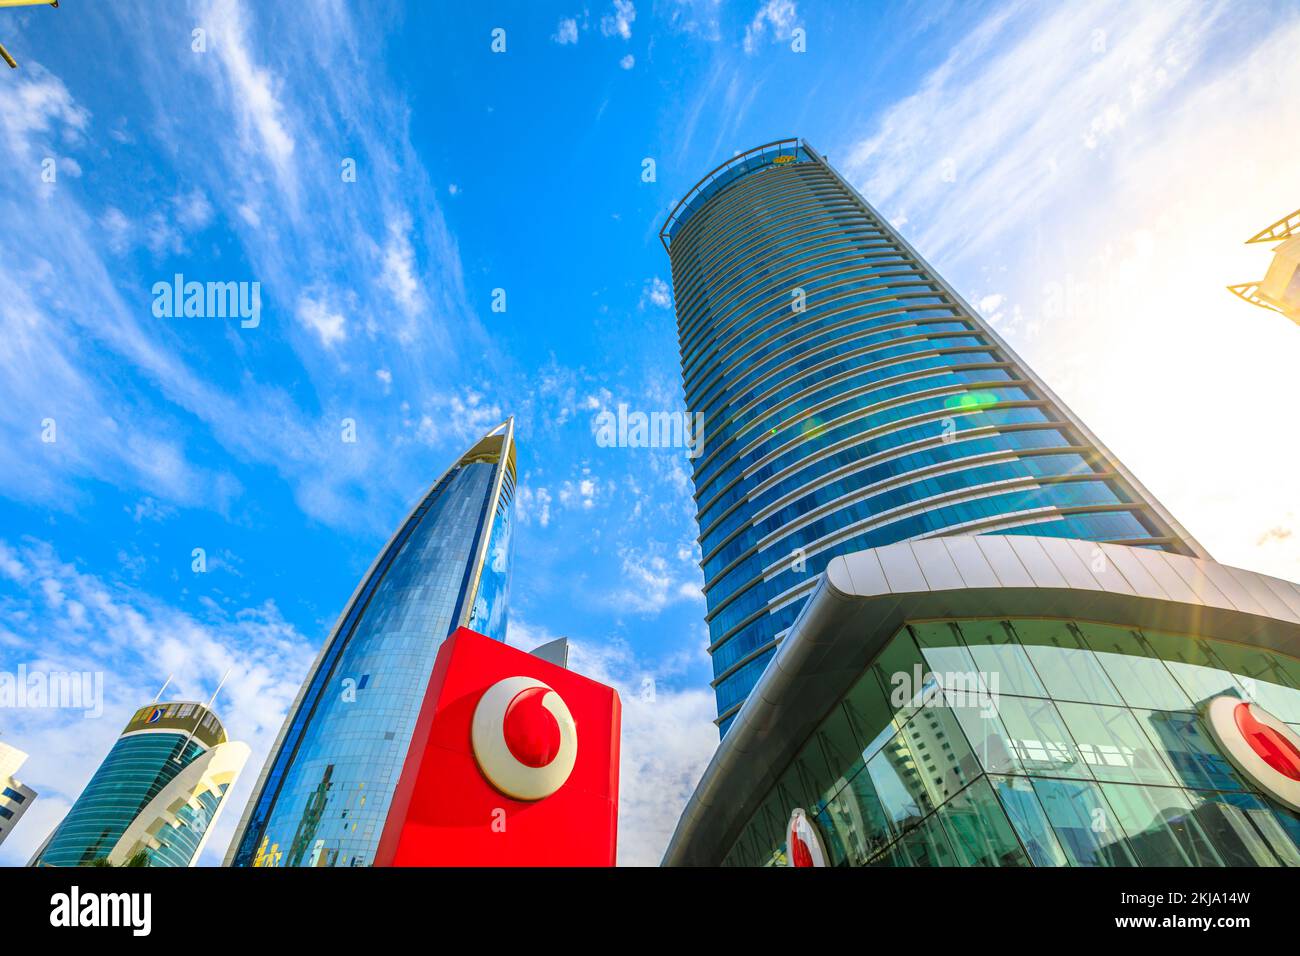 Doha, Qatar - February 17, 2019: bottom view of Vodafone Headquarters building and logo brand in Qatar West Bay area, Middle East. Vodafone is a Stock Photo